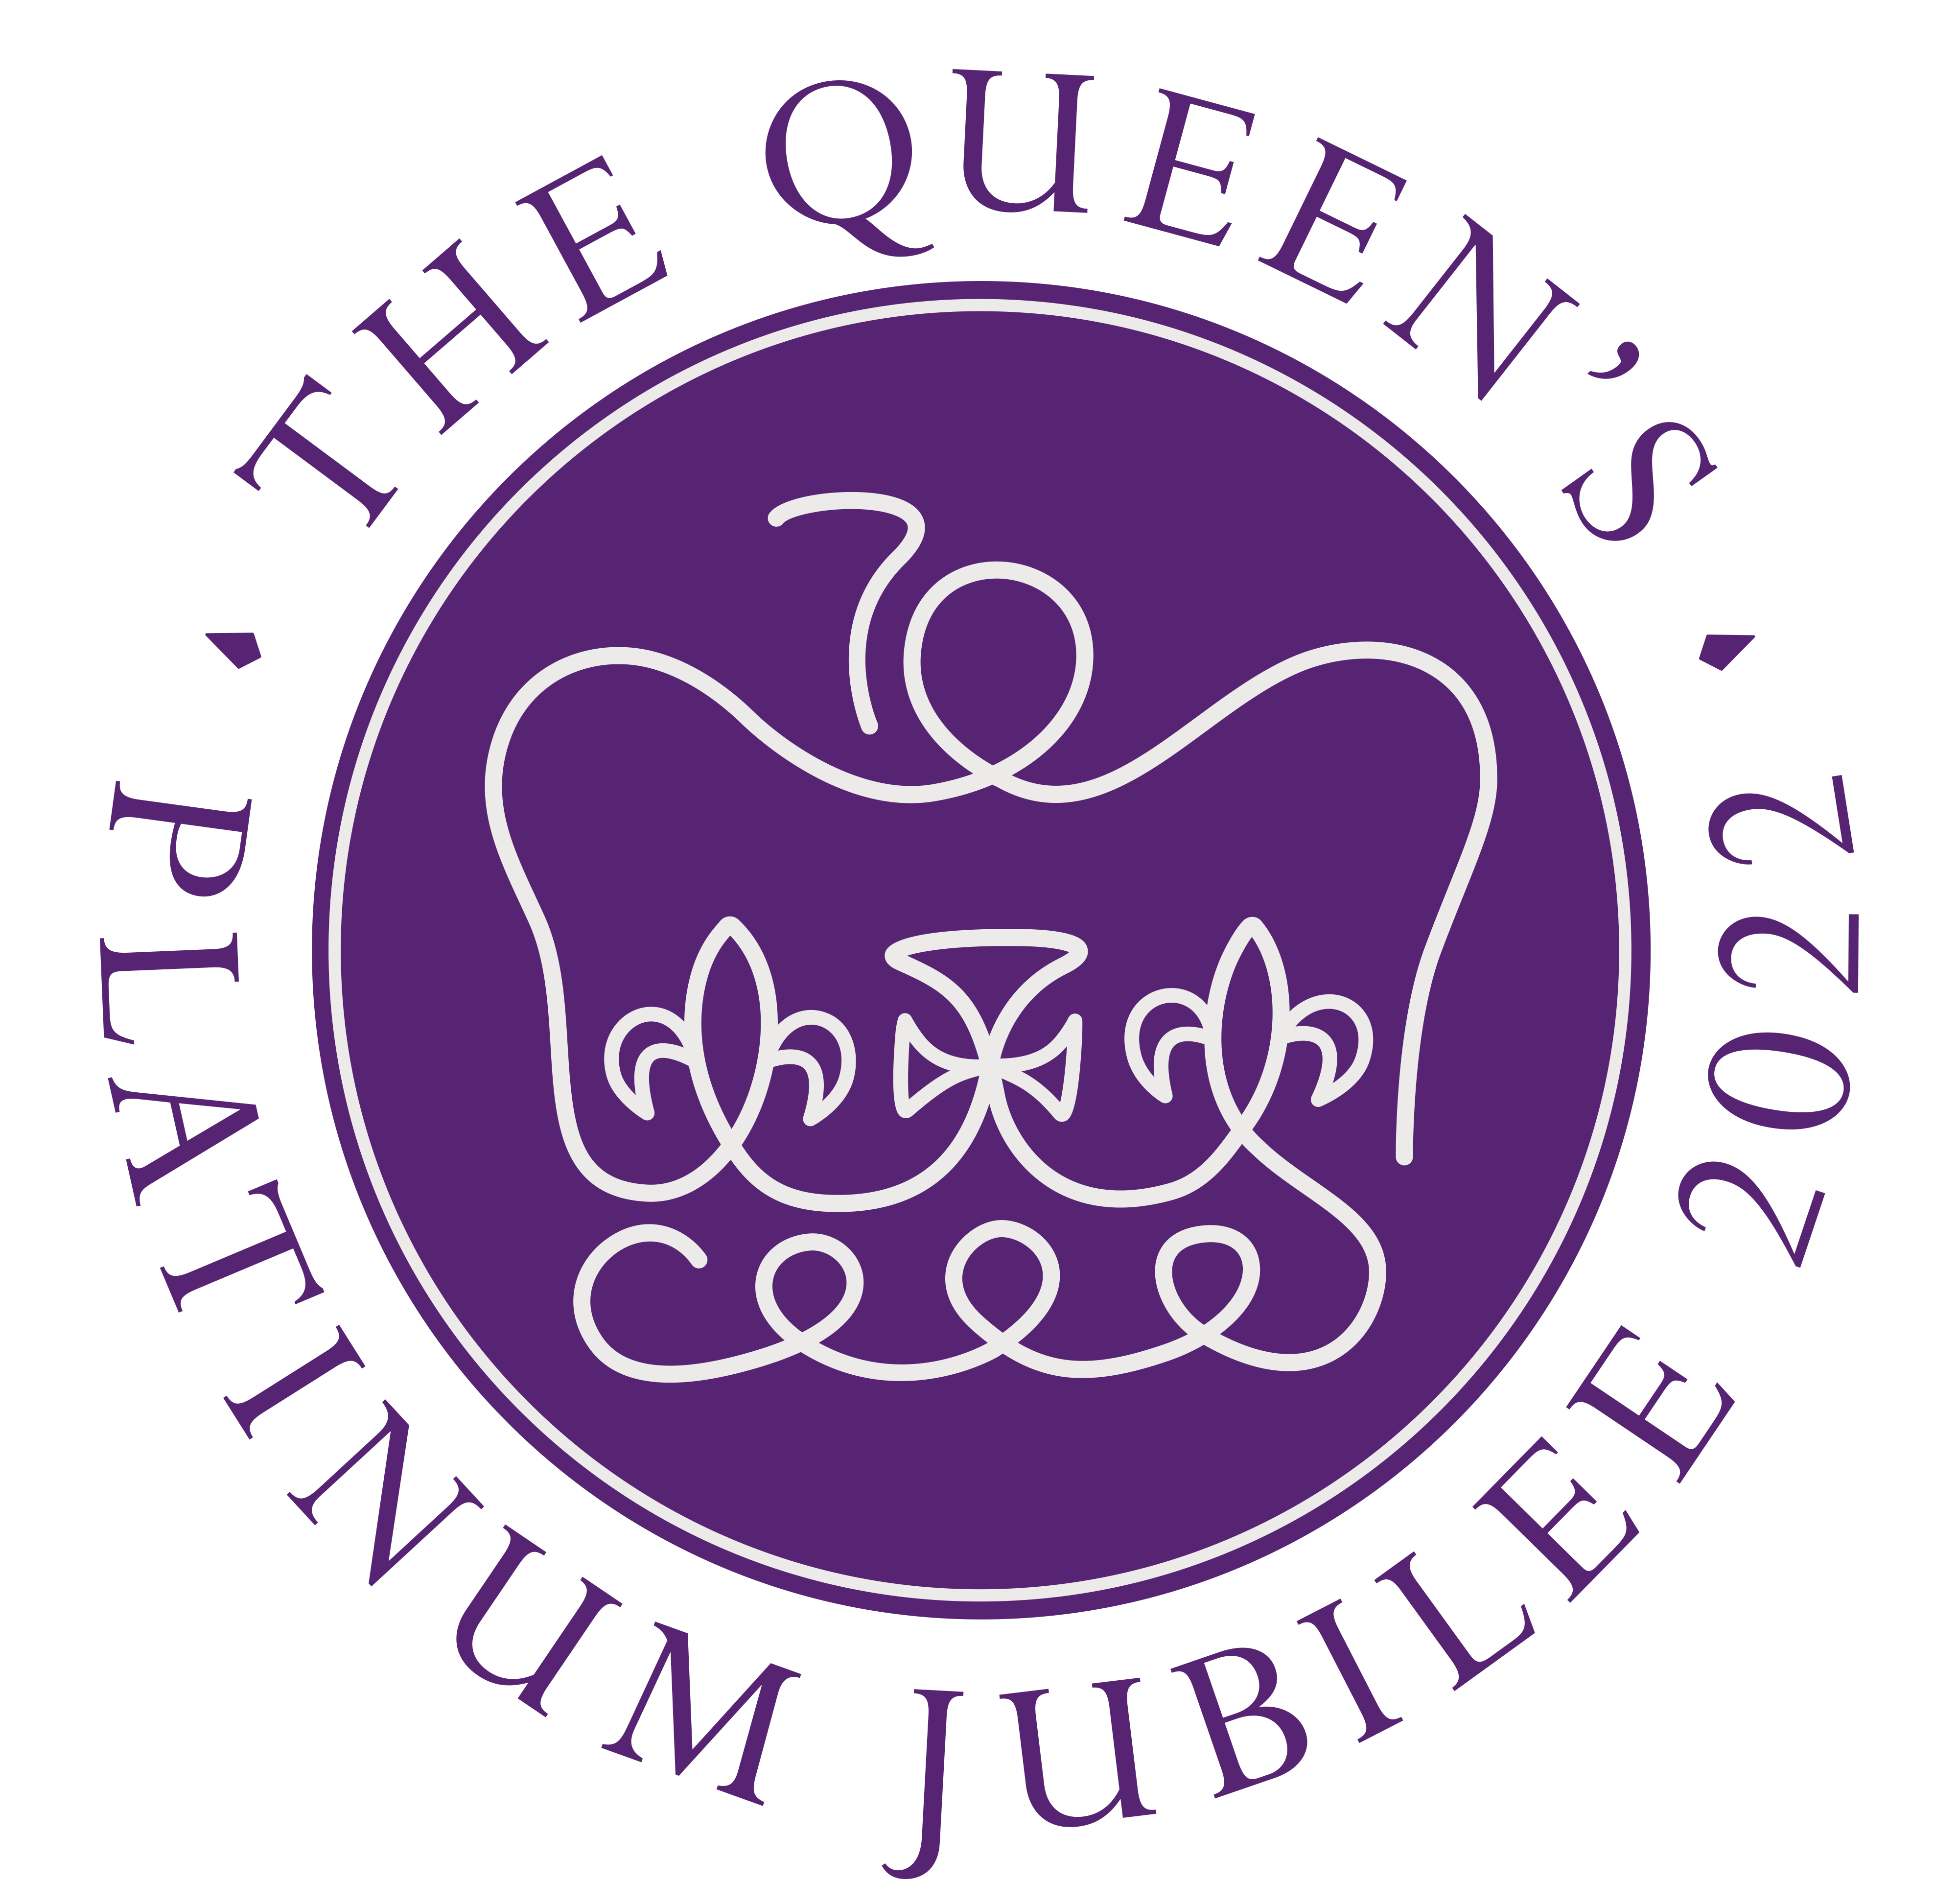 Queen’s Platinum Jubilee in South Ribble